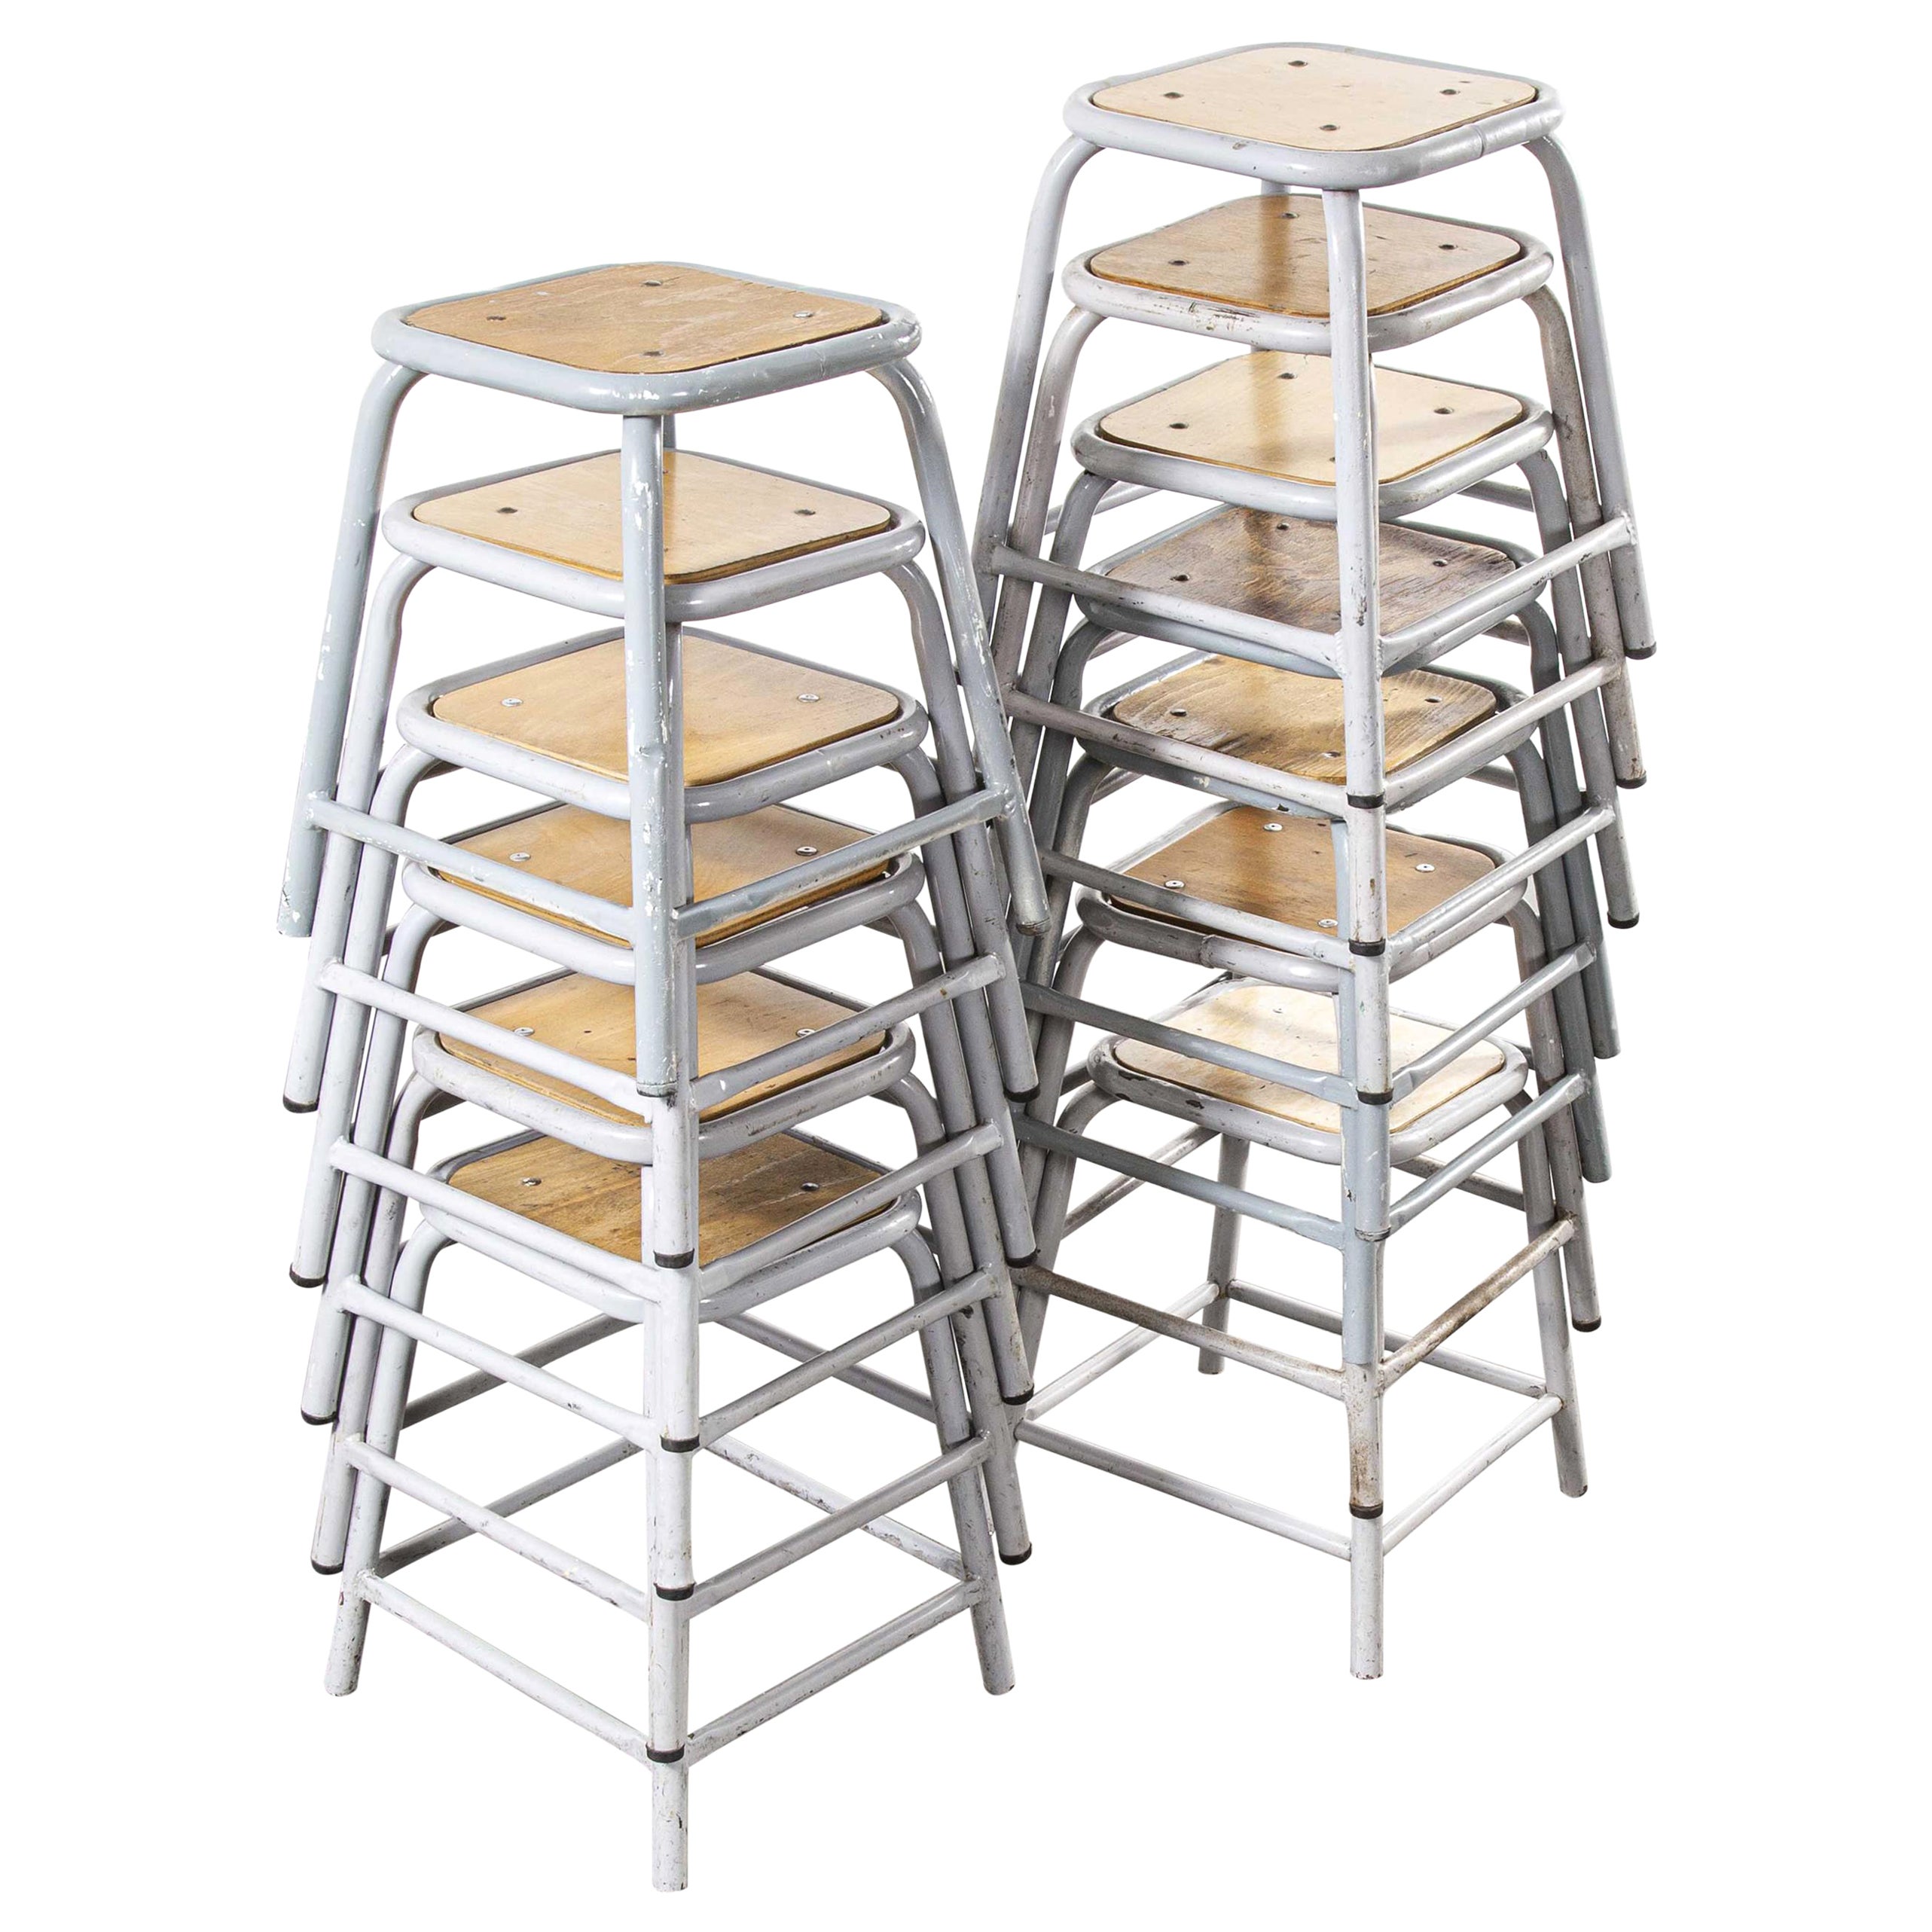 1960s Mullca Low Stacking Stool, Grey, Various Quantities Available